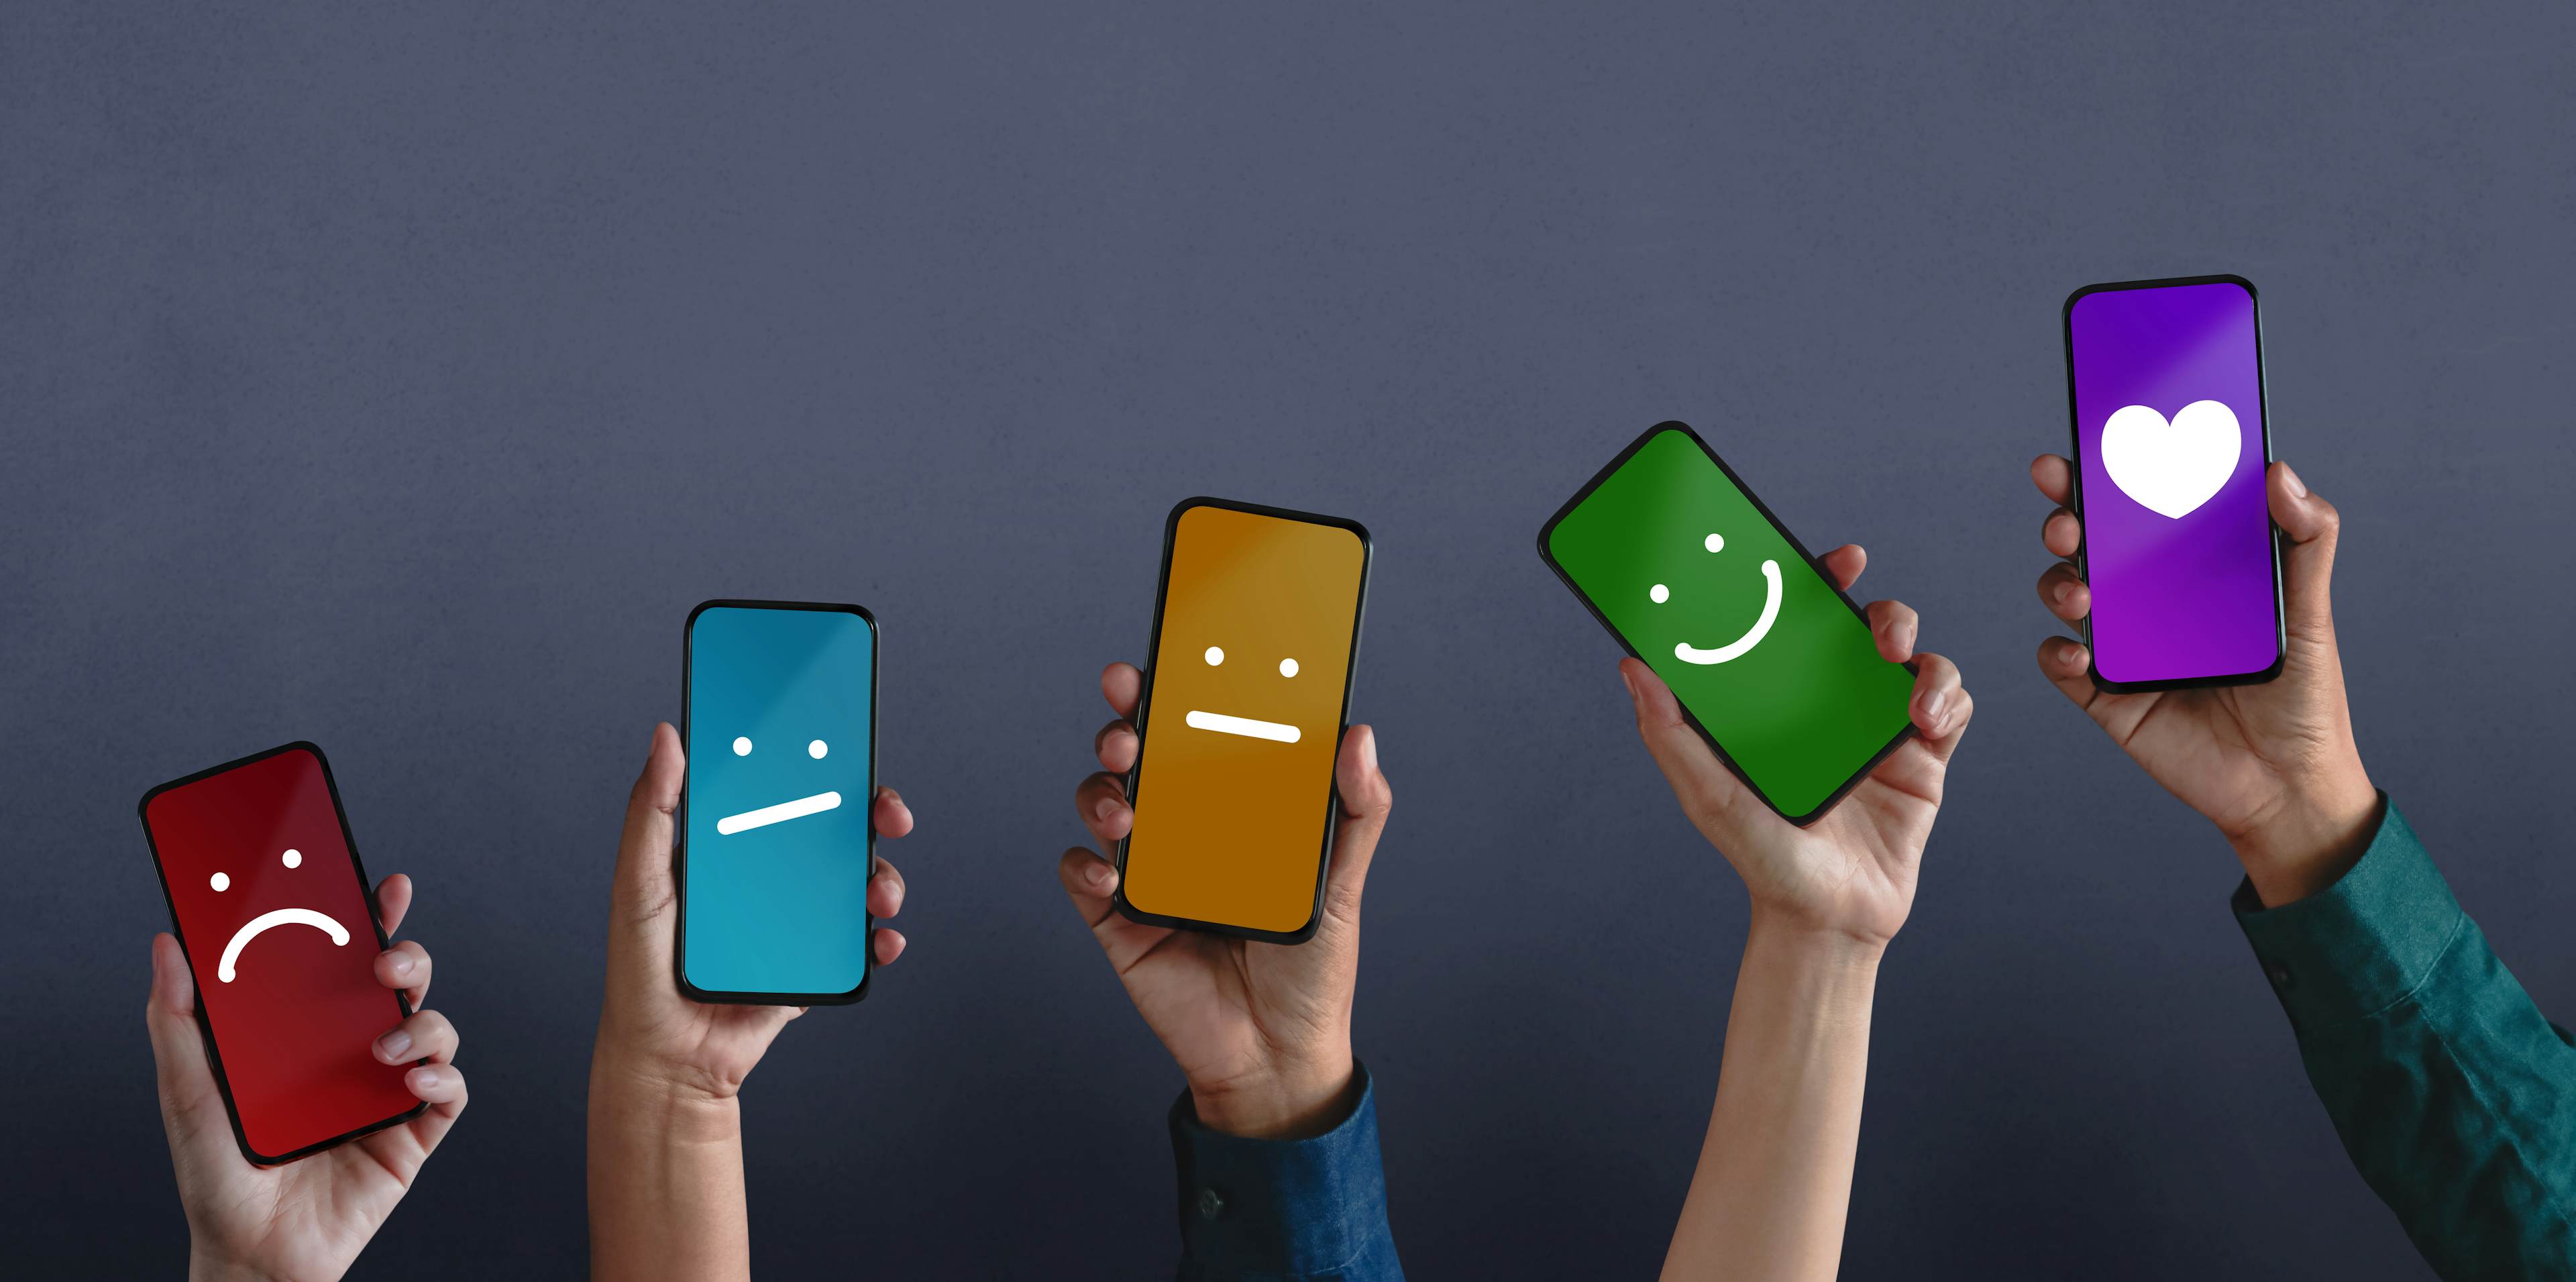 Simple drawings of faces on phones